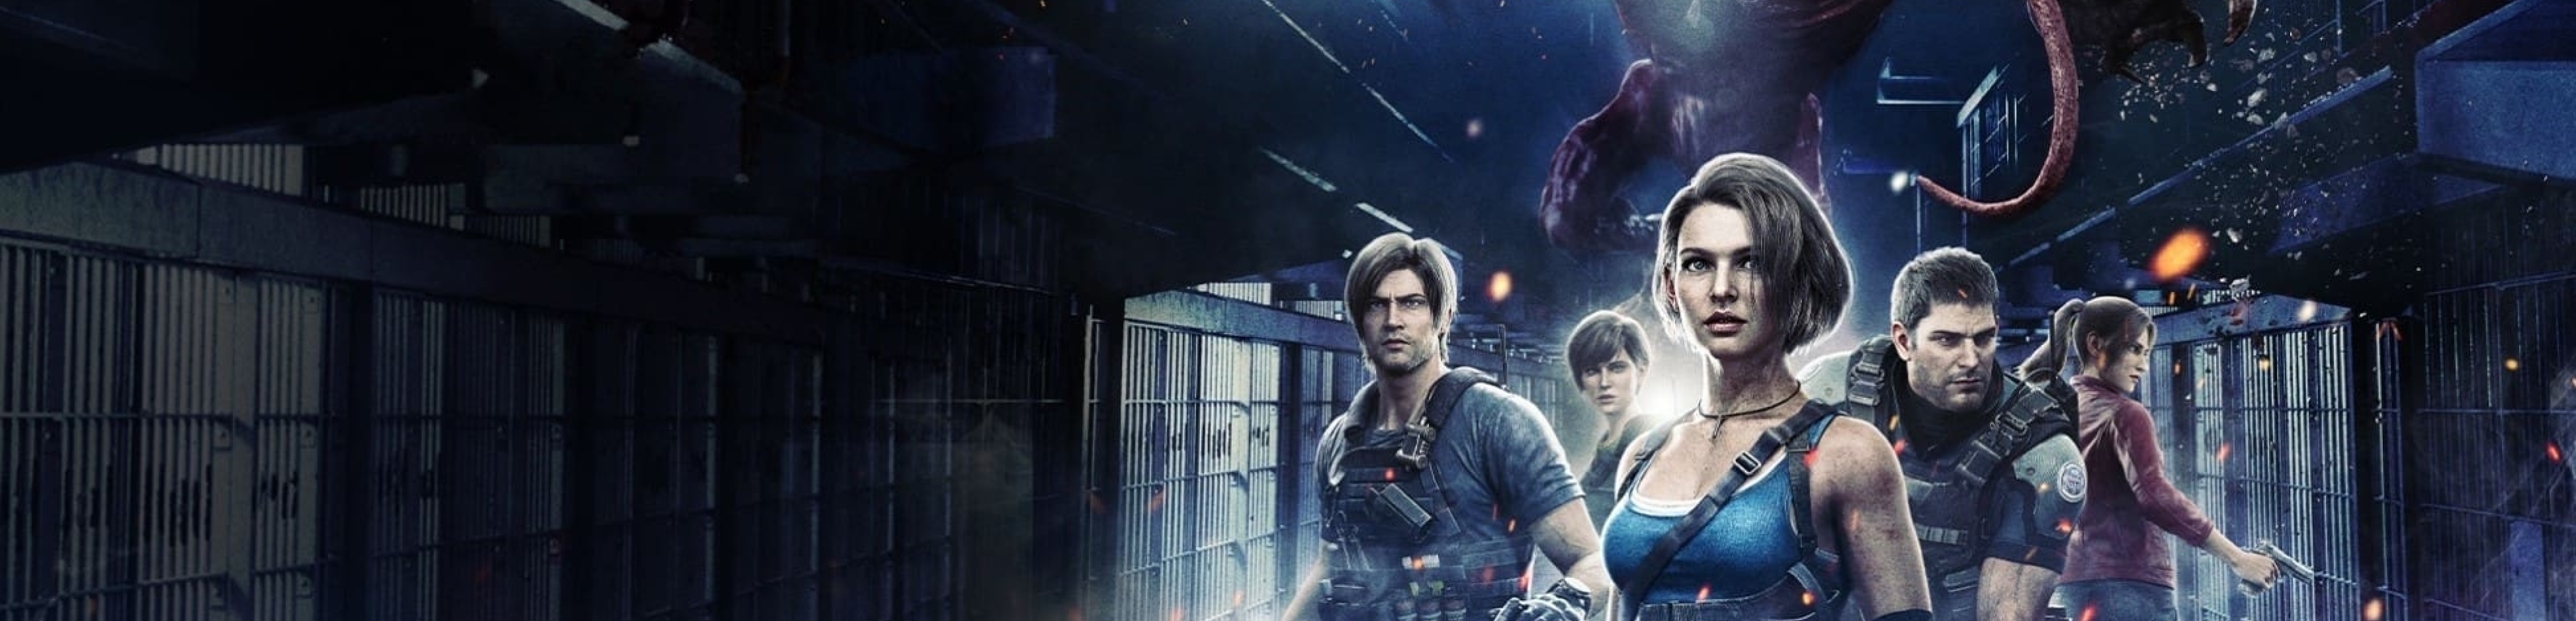 4480x1080 Resolution Poster Of Resident Evil Death Island 4480x1080